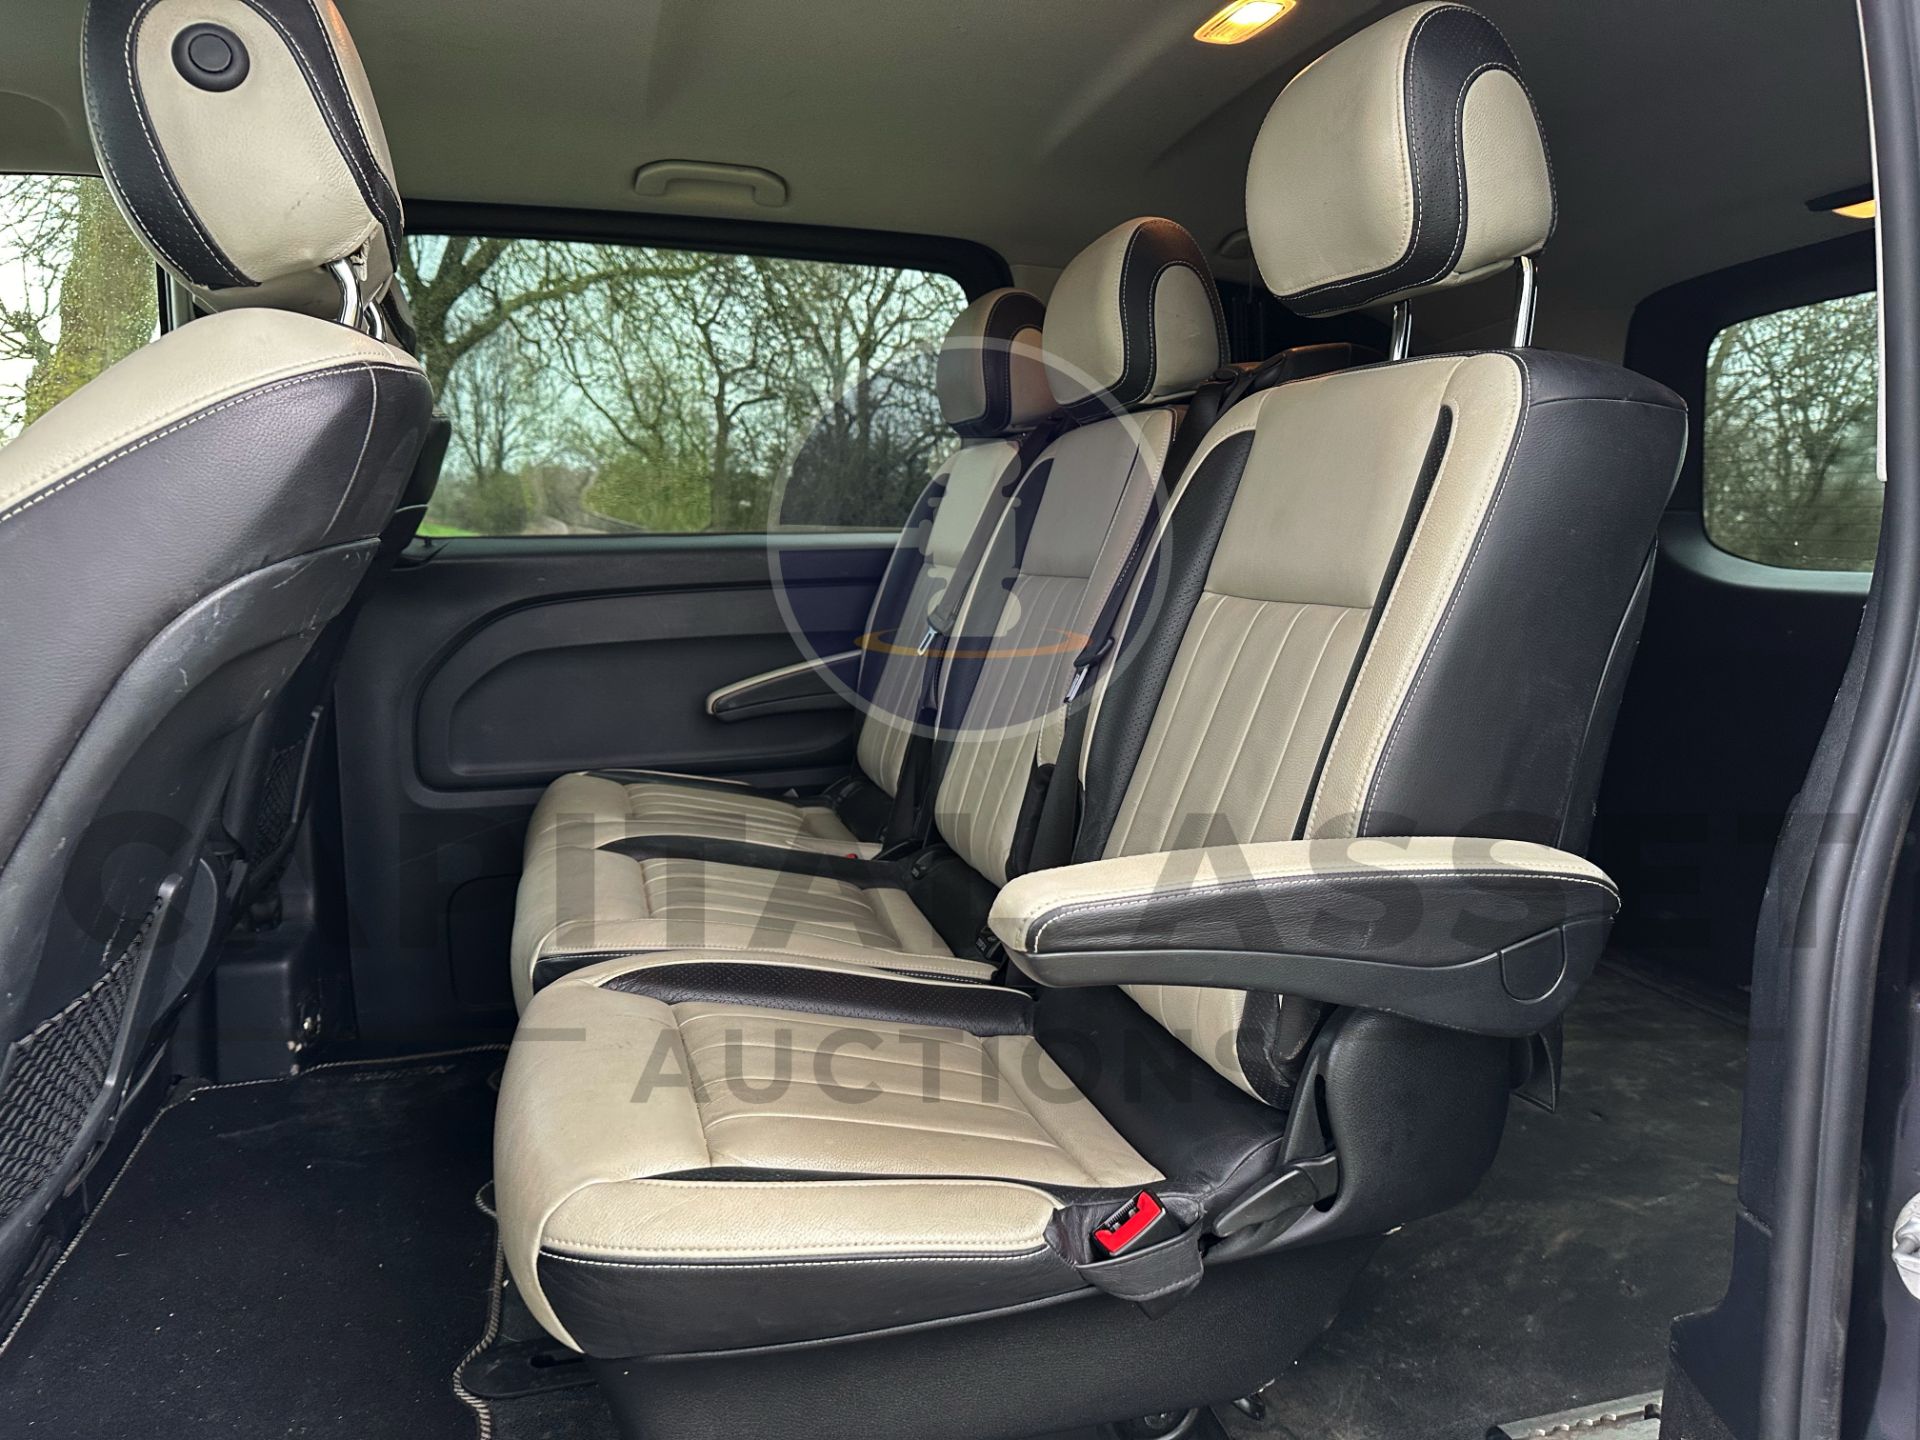 (ON SALE) MERCEDES-BENZ VITO 119 CDI AUTO *SWB - 5 SEATER DUALINER* (2019 - EURO 6) *SPORT EDITION* - Image 23 of 44